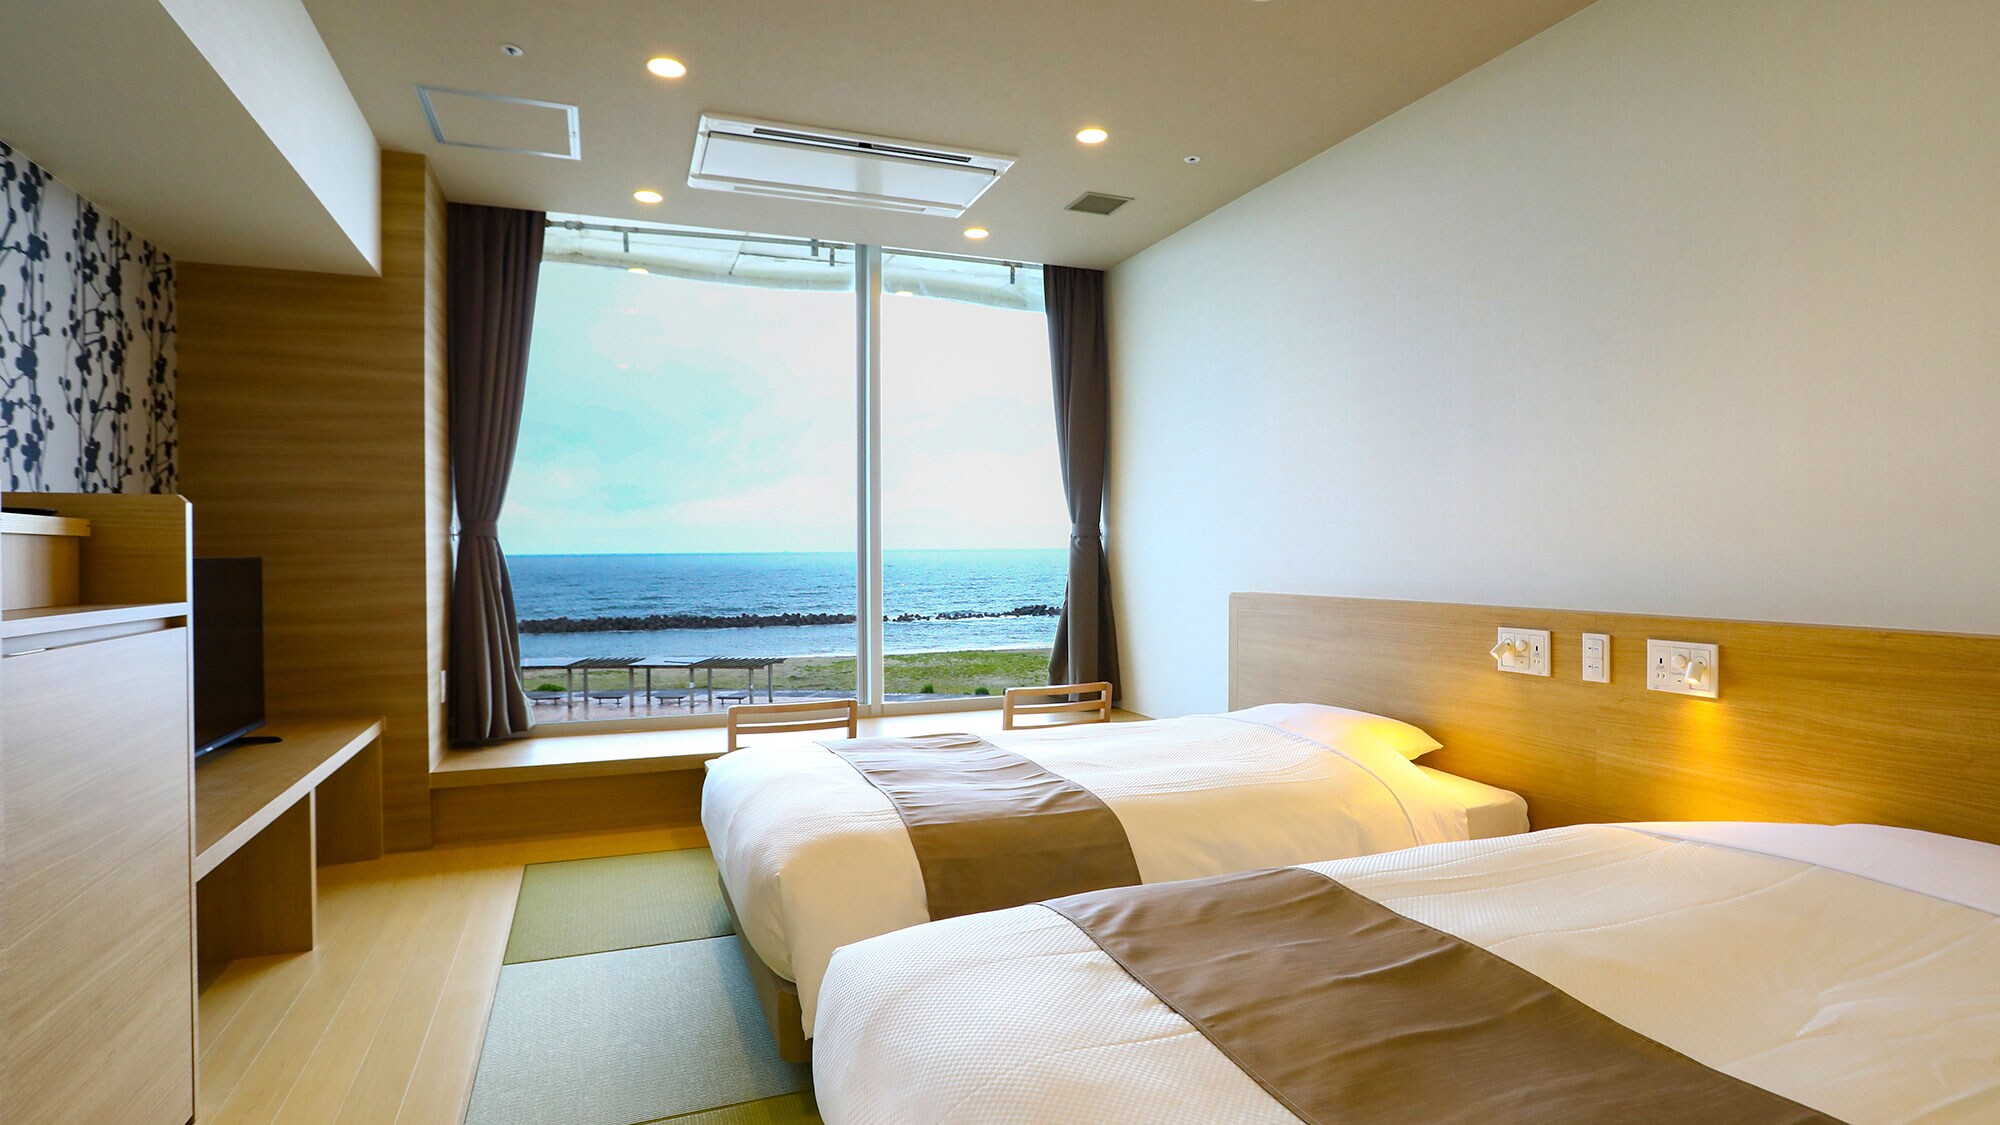 [Non-smoking] Ocean view twin Japanese-style room 2 people capacity